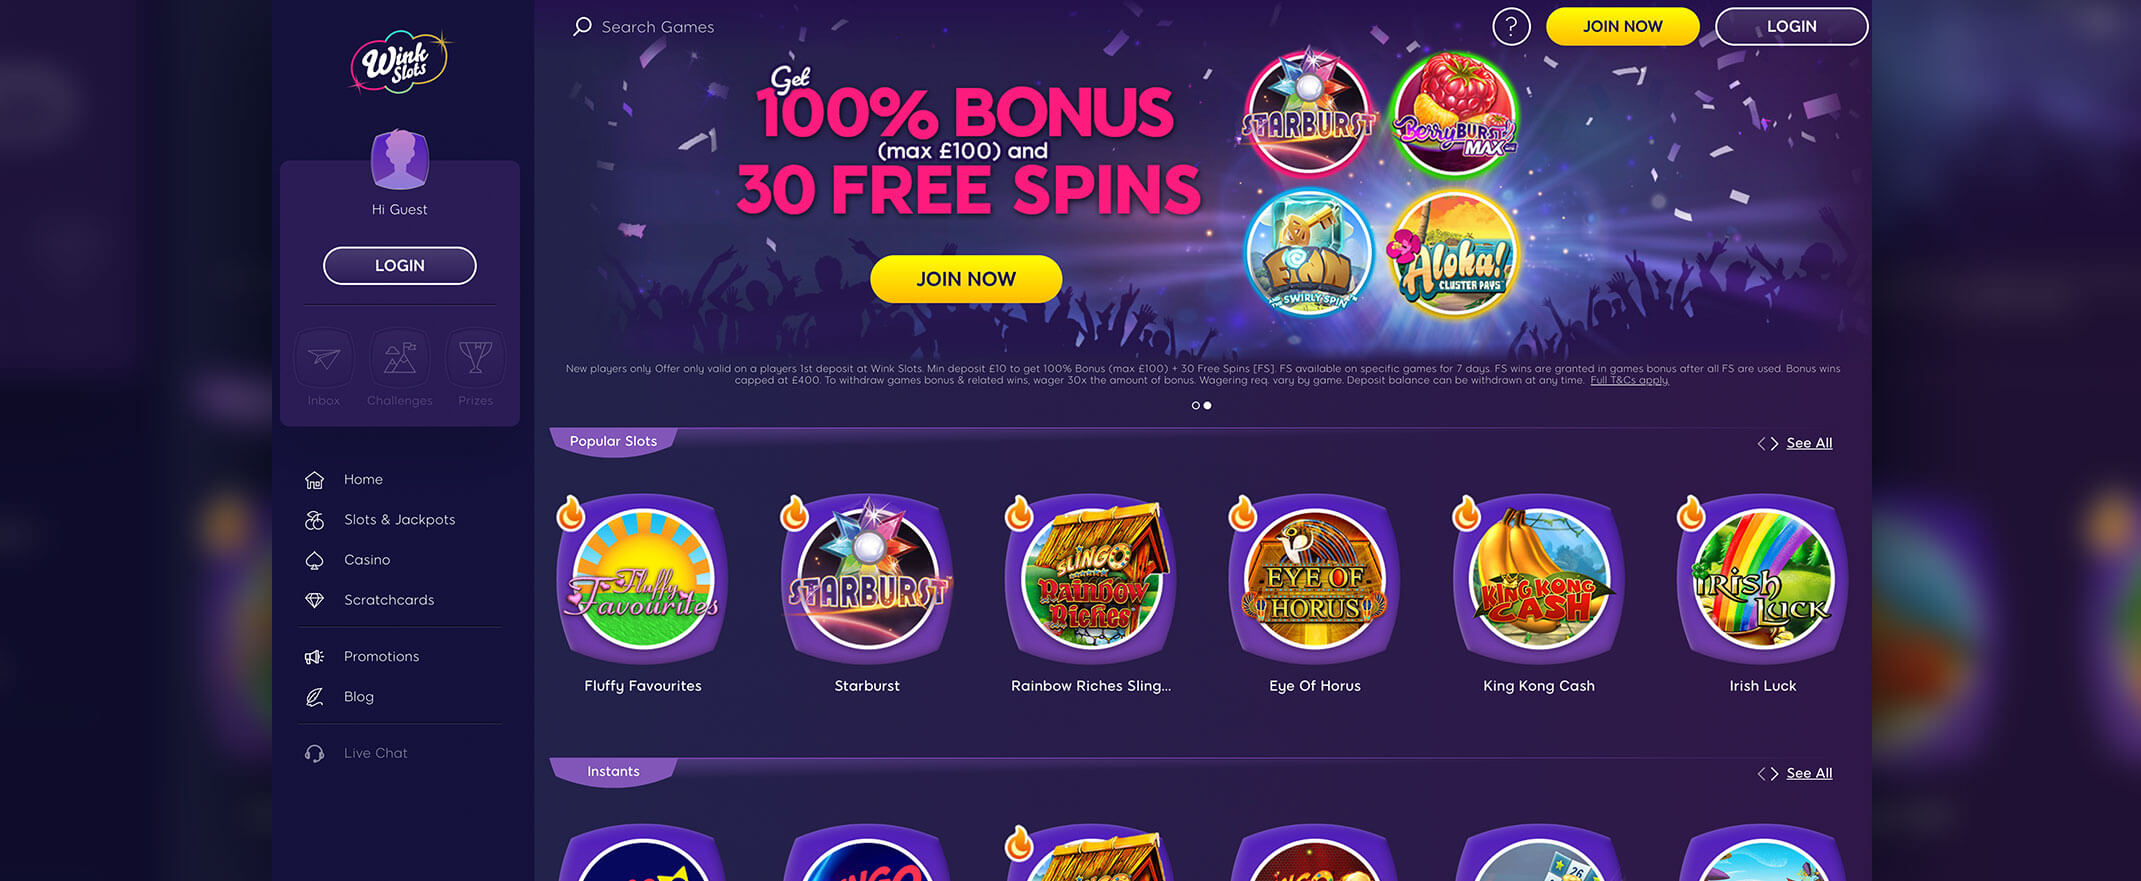 Wink Slots Casino Review Screenshot of the Homepage